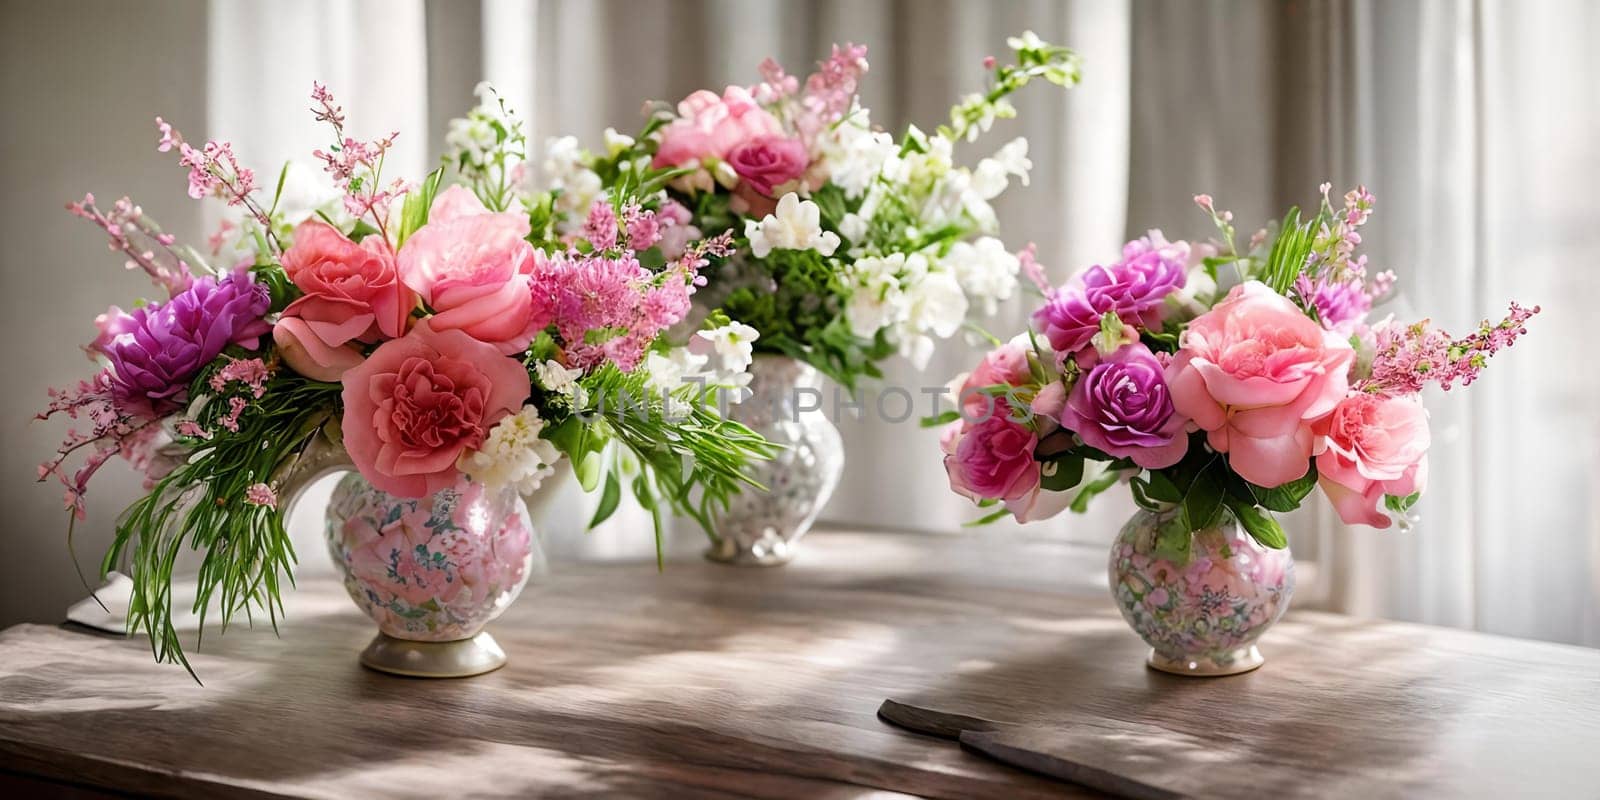 Delicate elegance of blooming flowers, intricate petals, and vibrant floral arrangements